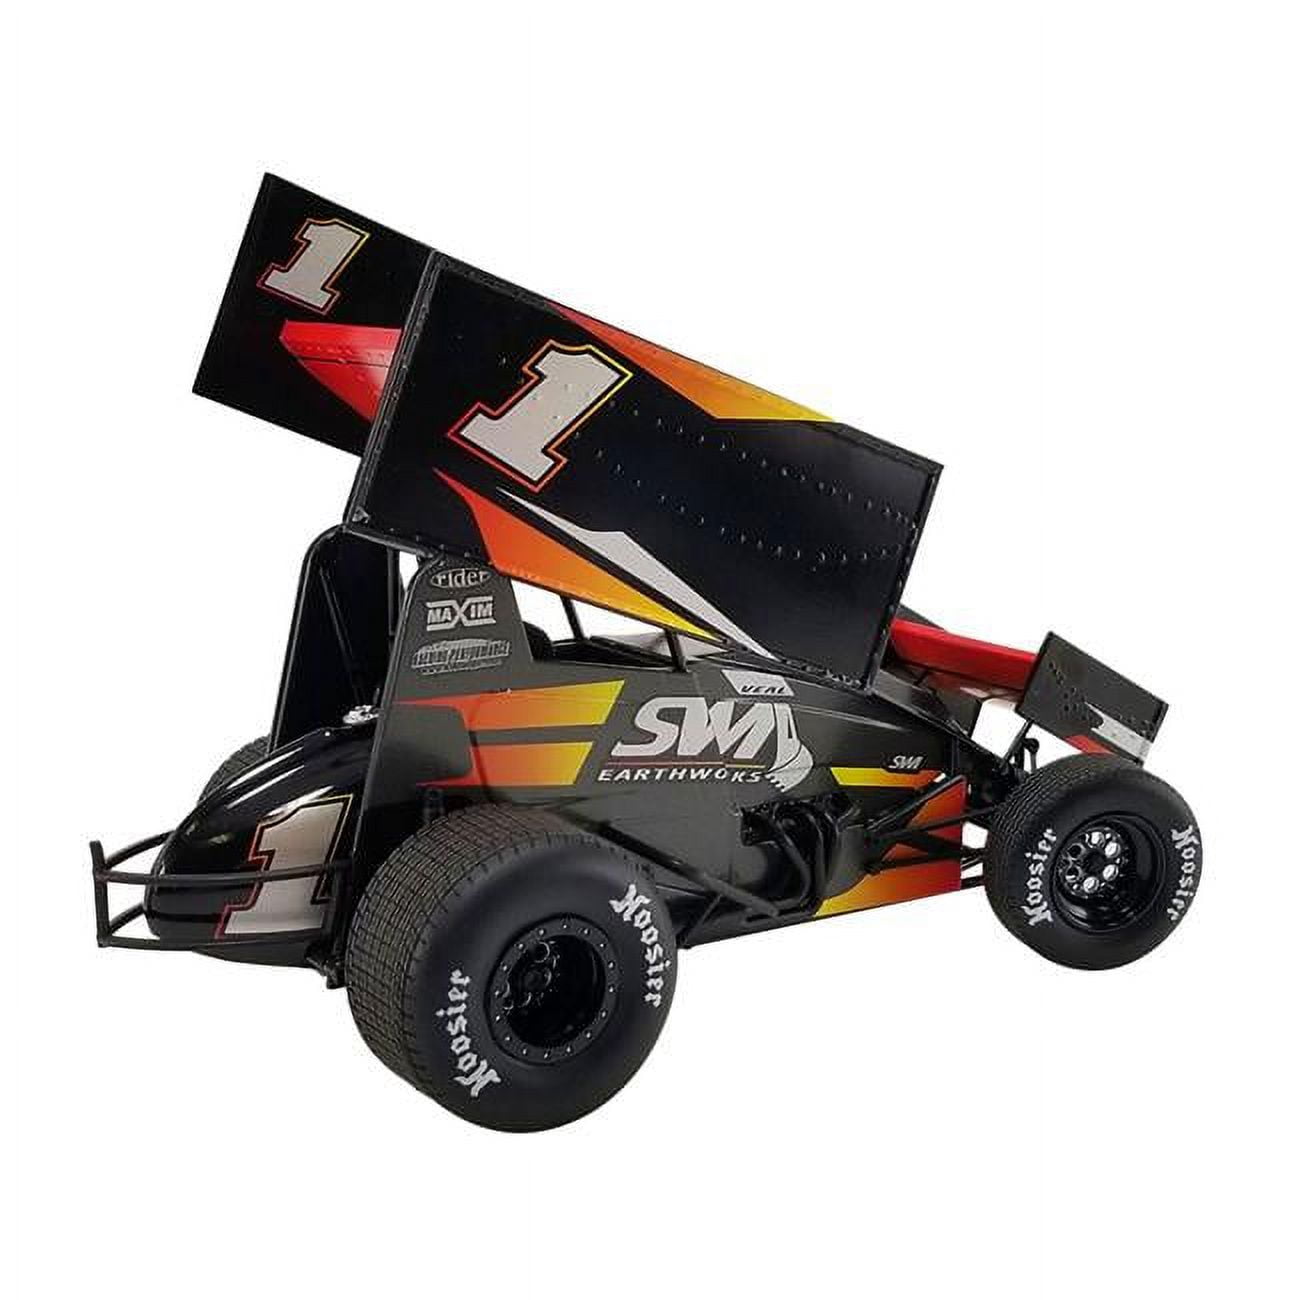 Picture of Acme A1822021 Winged Sprint Car No.1 Jamie Veal SWI Earthworks SWI Engineering Racing Team 2022 1 by 18 Scale Diecast Model Car